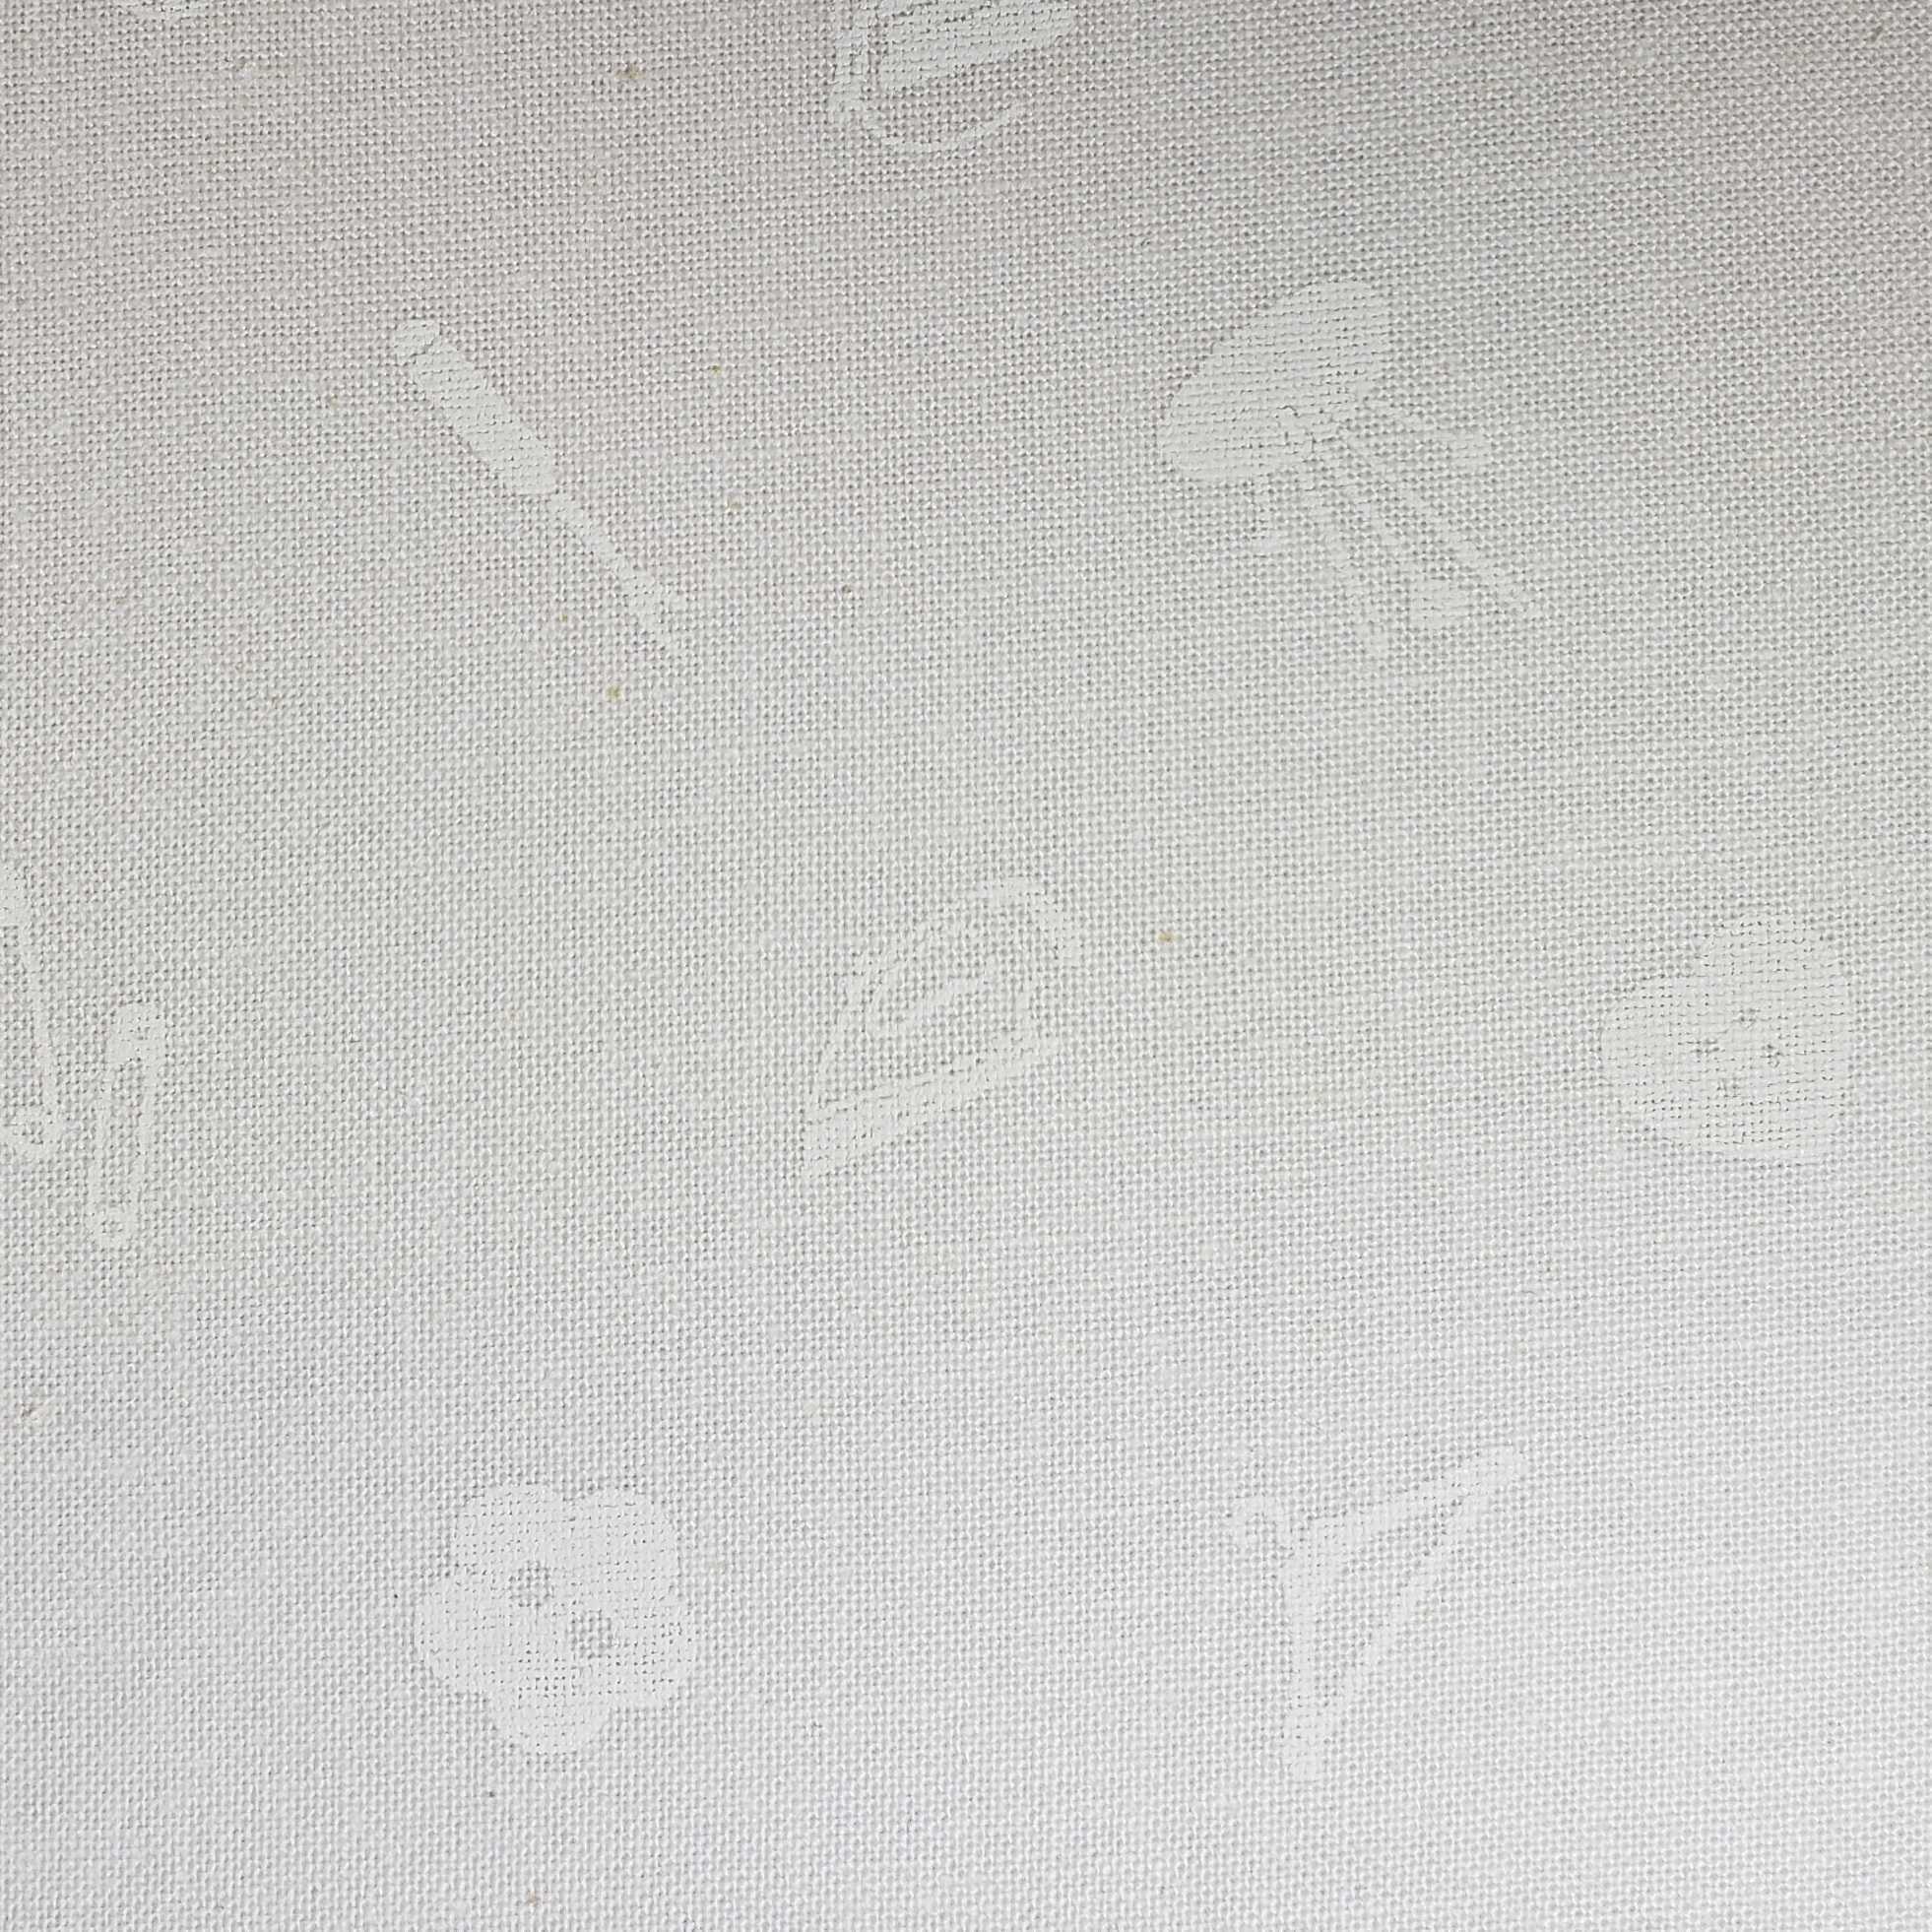 Morning Mist White on White Tossed Sewing Items Fabric-Blank Quilting Corporation-My Favorite Quilt Store